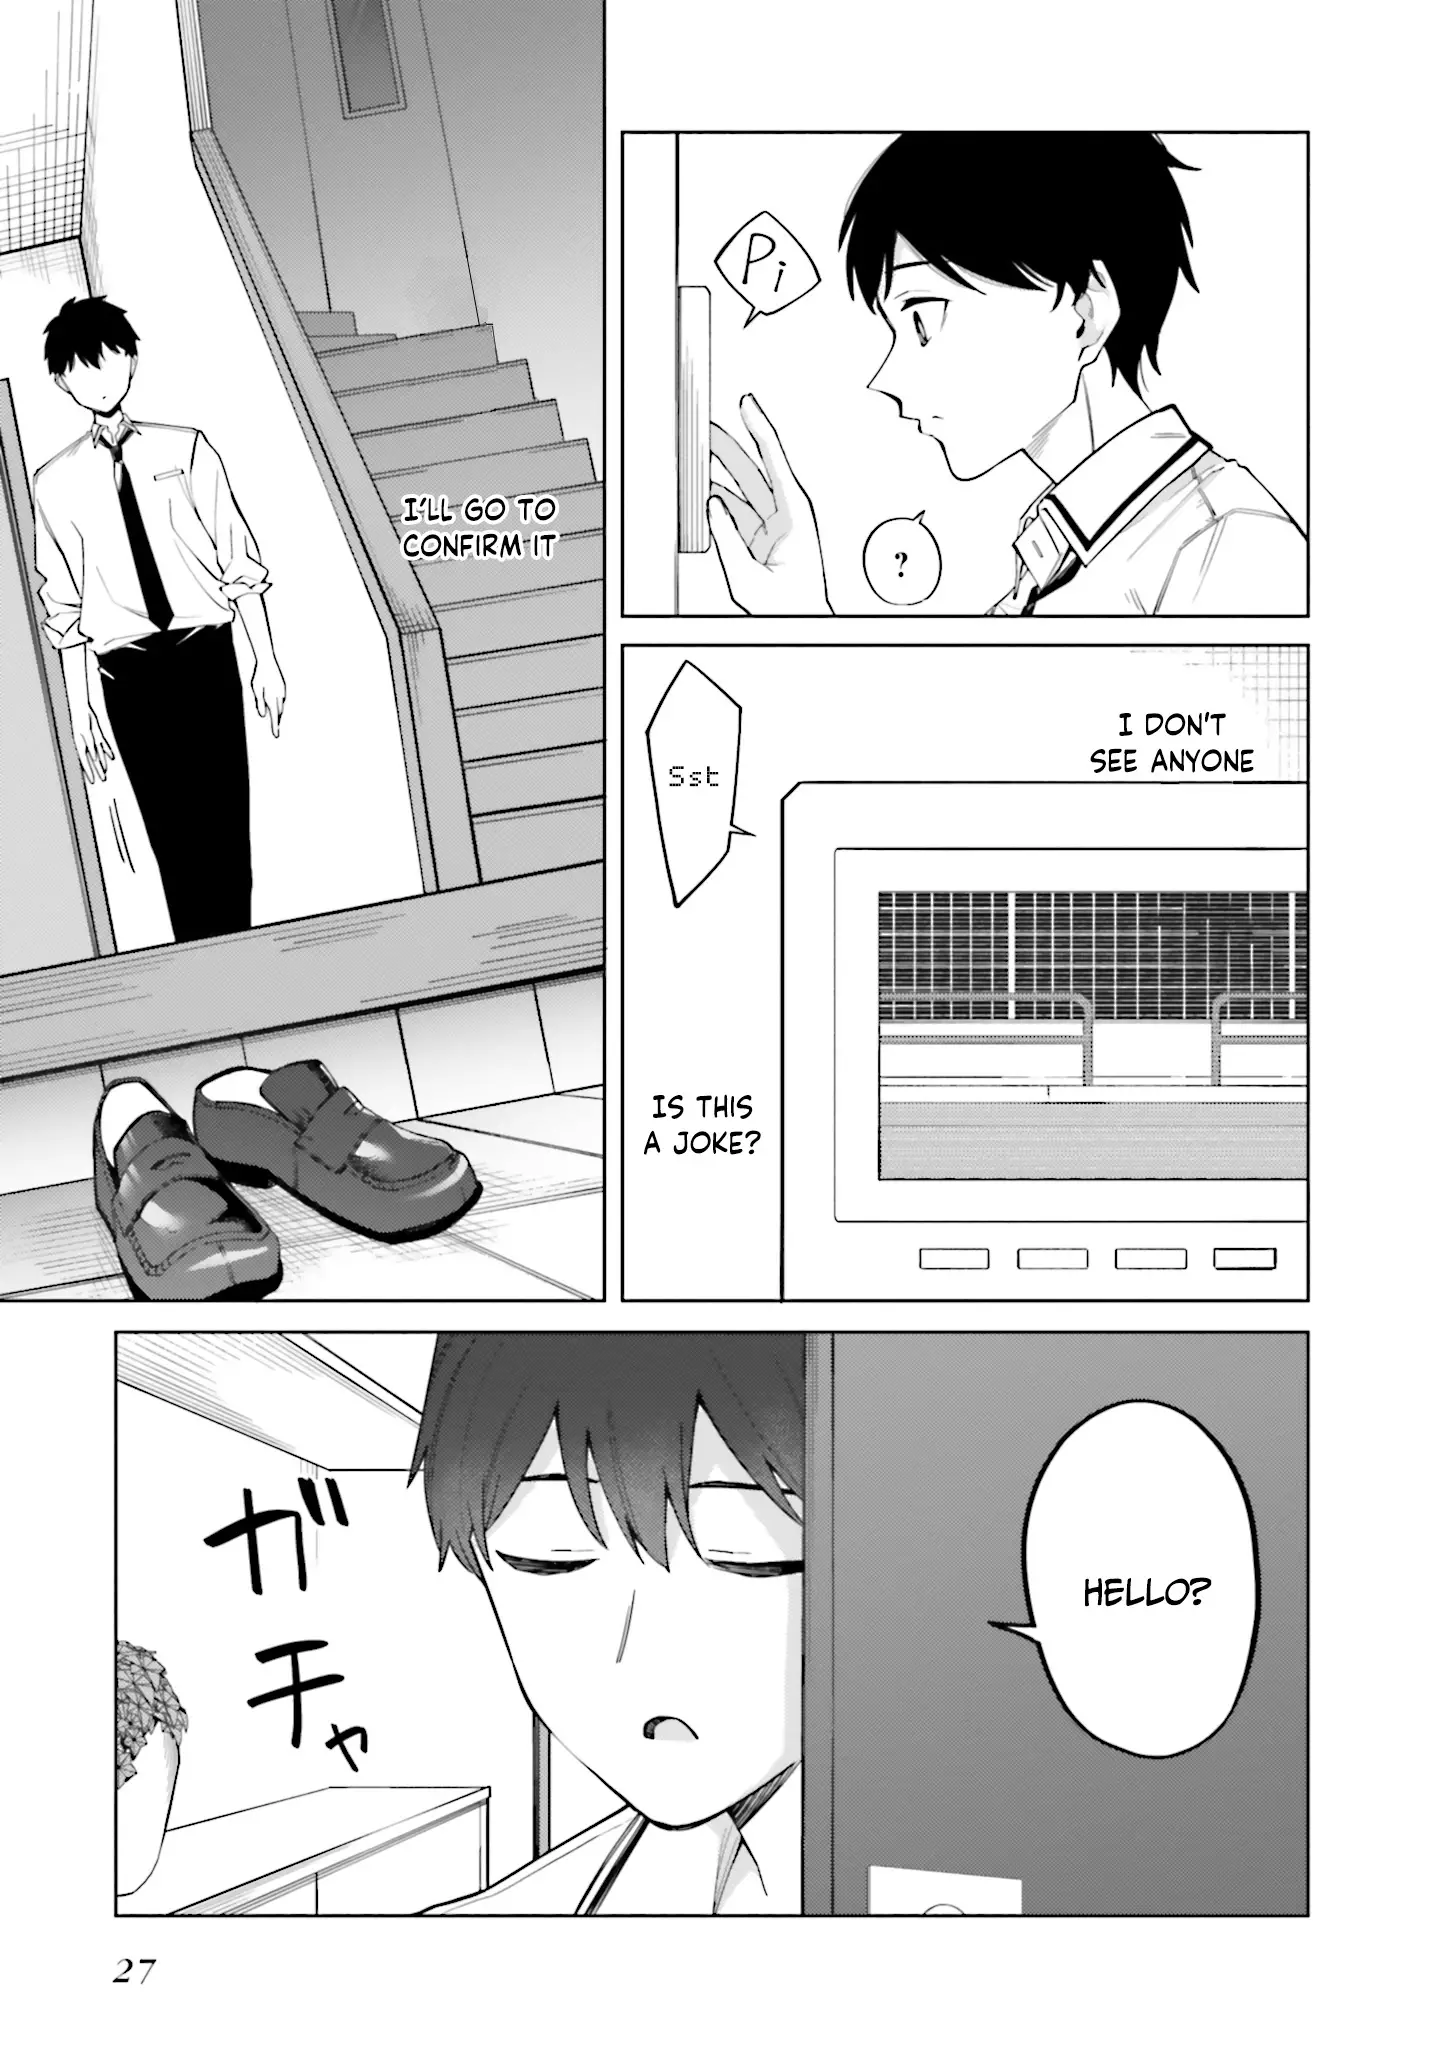 I Don't Understand Shirogane-San's Facial Expression At All - 13 page 28-9248b71b